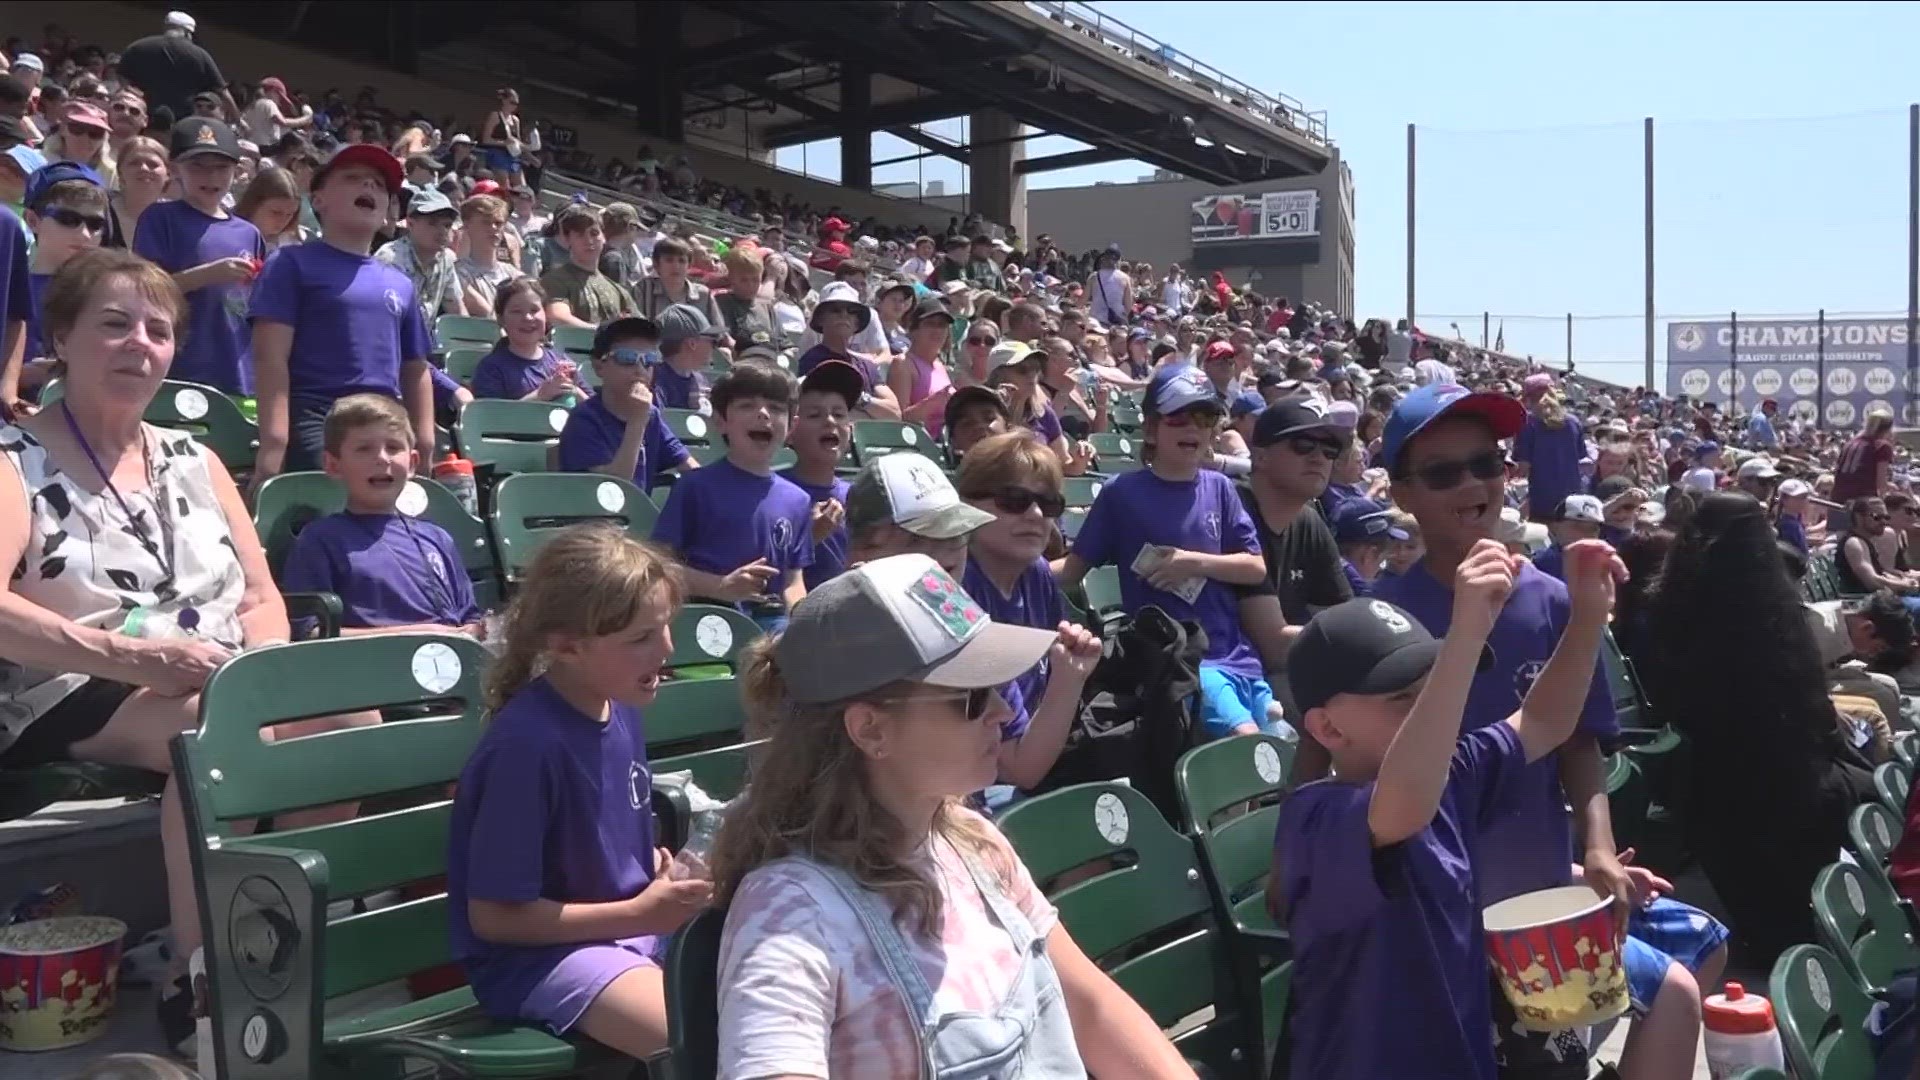 Nearly 16 thousand kids and teachers filled Sahlen field stands